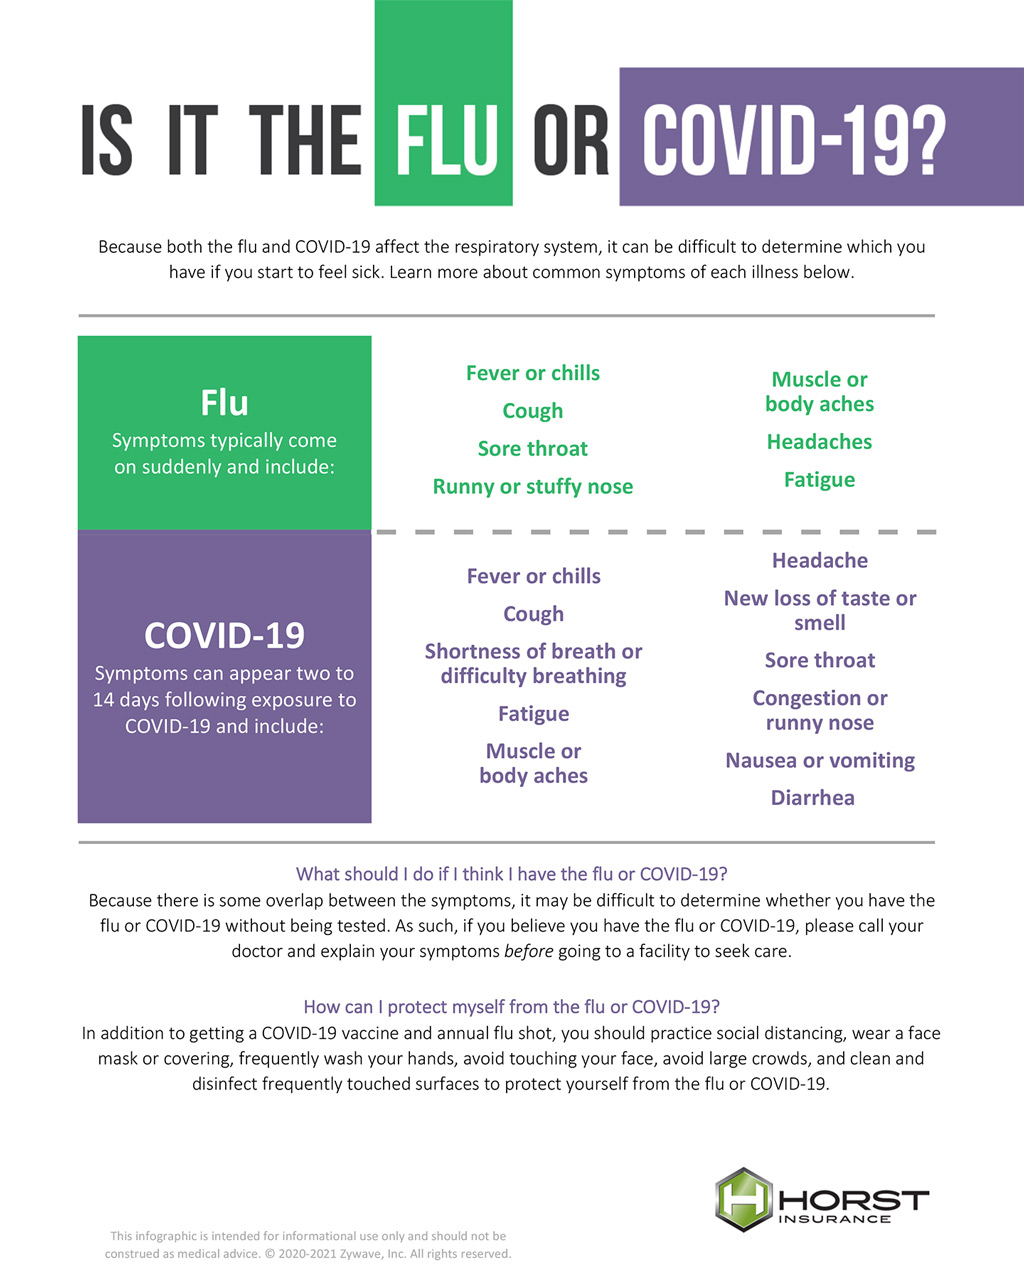 Is it the Flu or COVID-19?